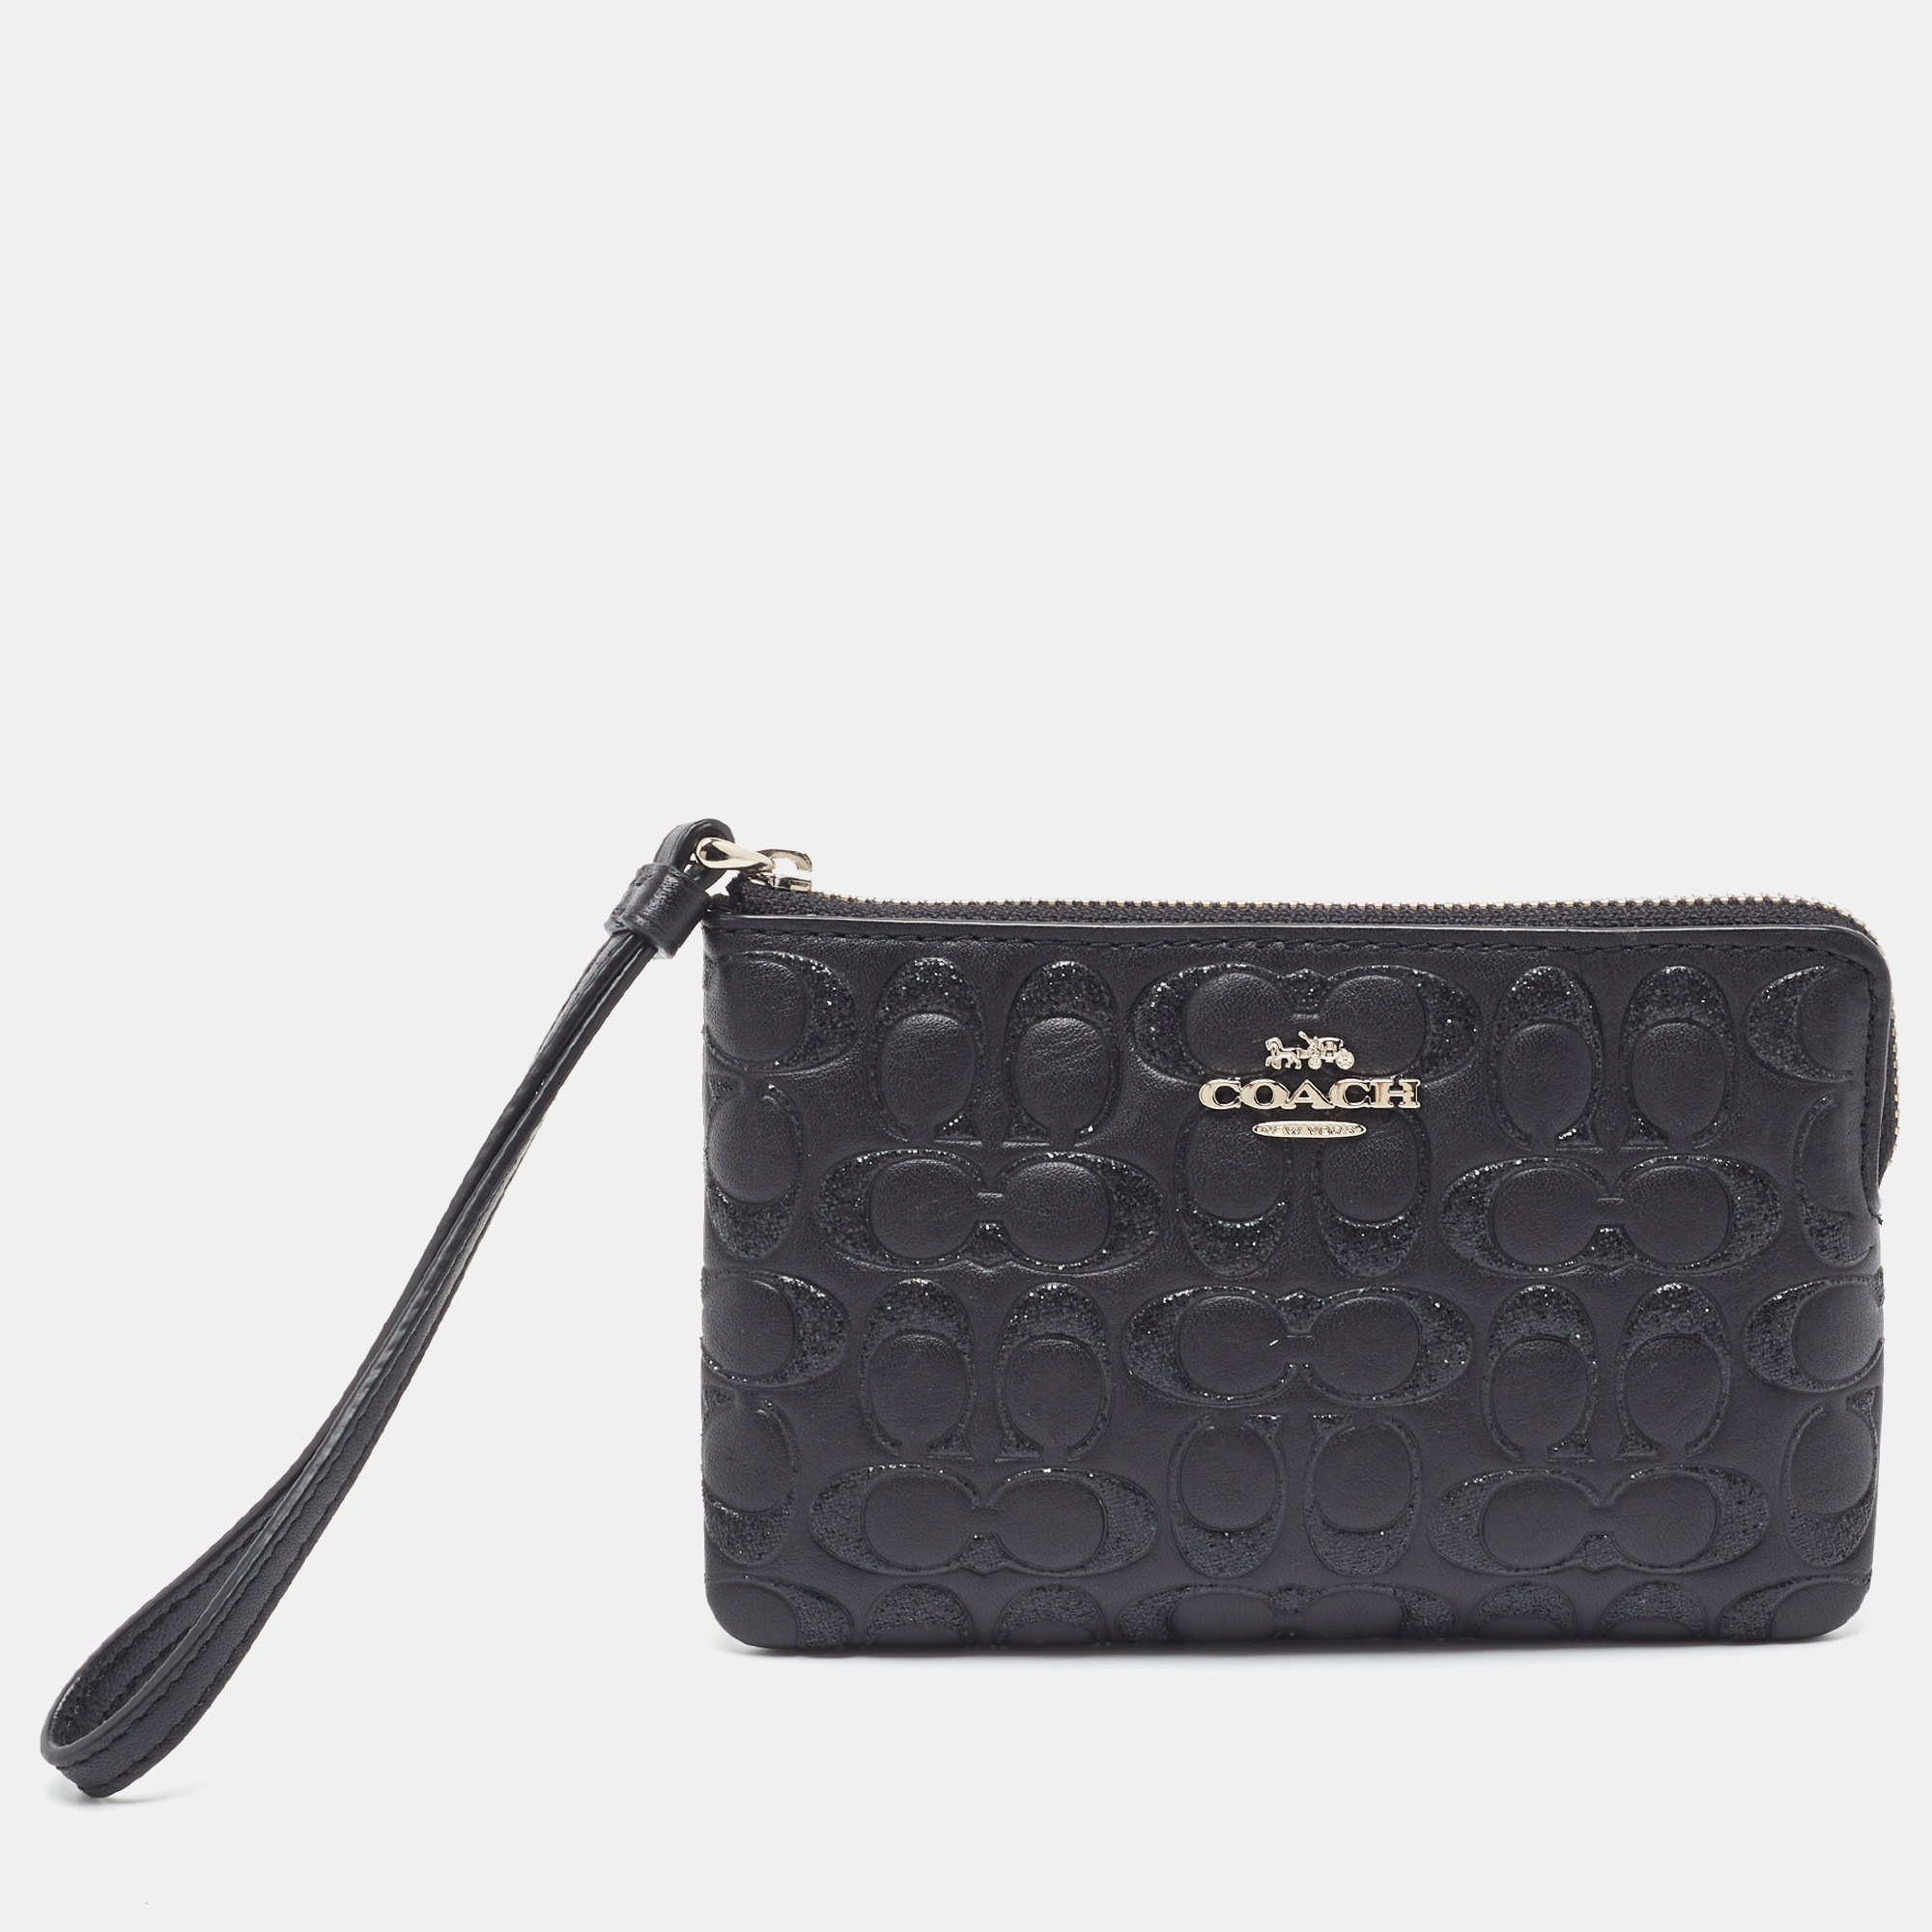 

Coach Black Signature Glitter Embossed Leather Boxed Wristlet Clutch